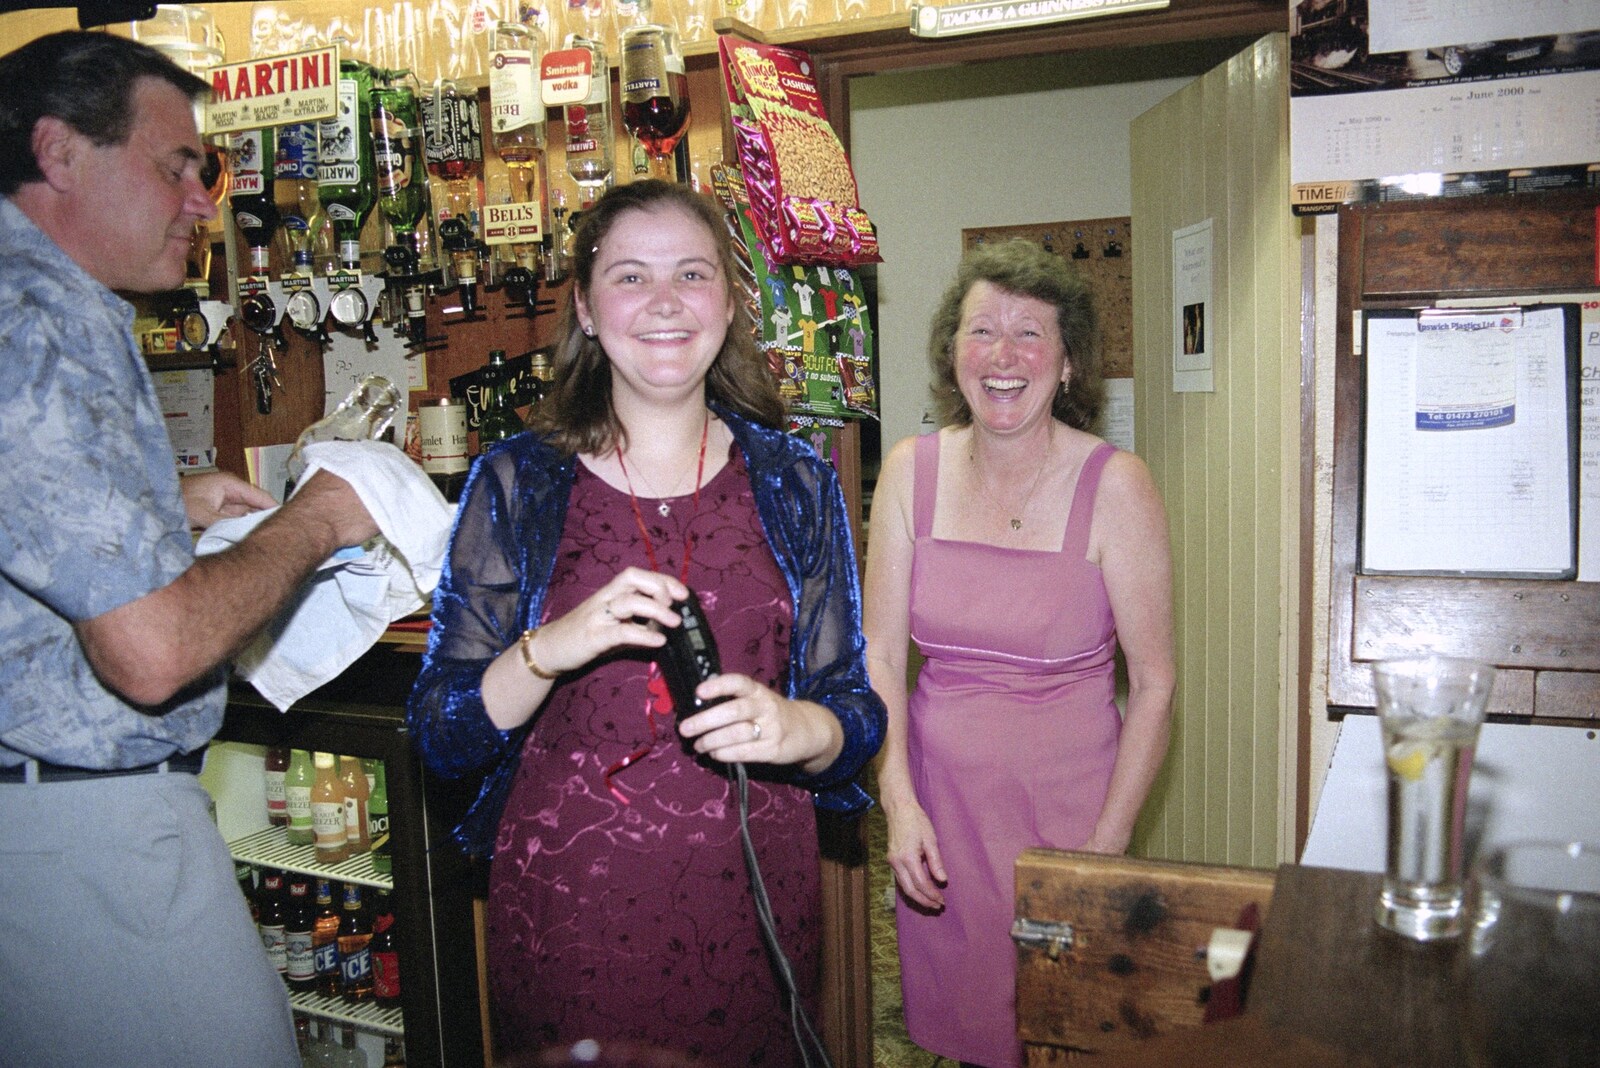 Alan, Claire and Sylvia from Lorraine's 21st Birthday, The Swan, Suffolk - 10th June 2000